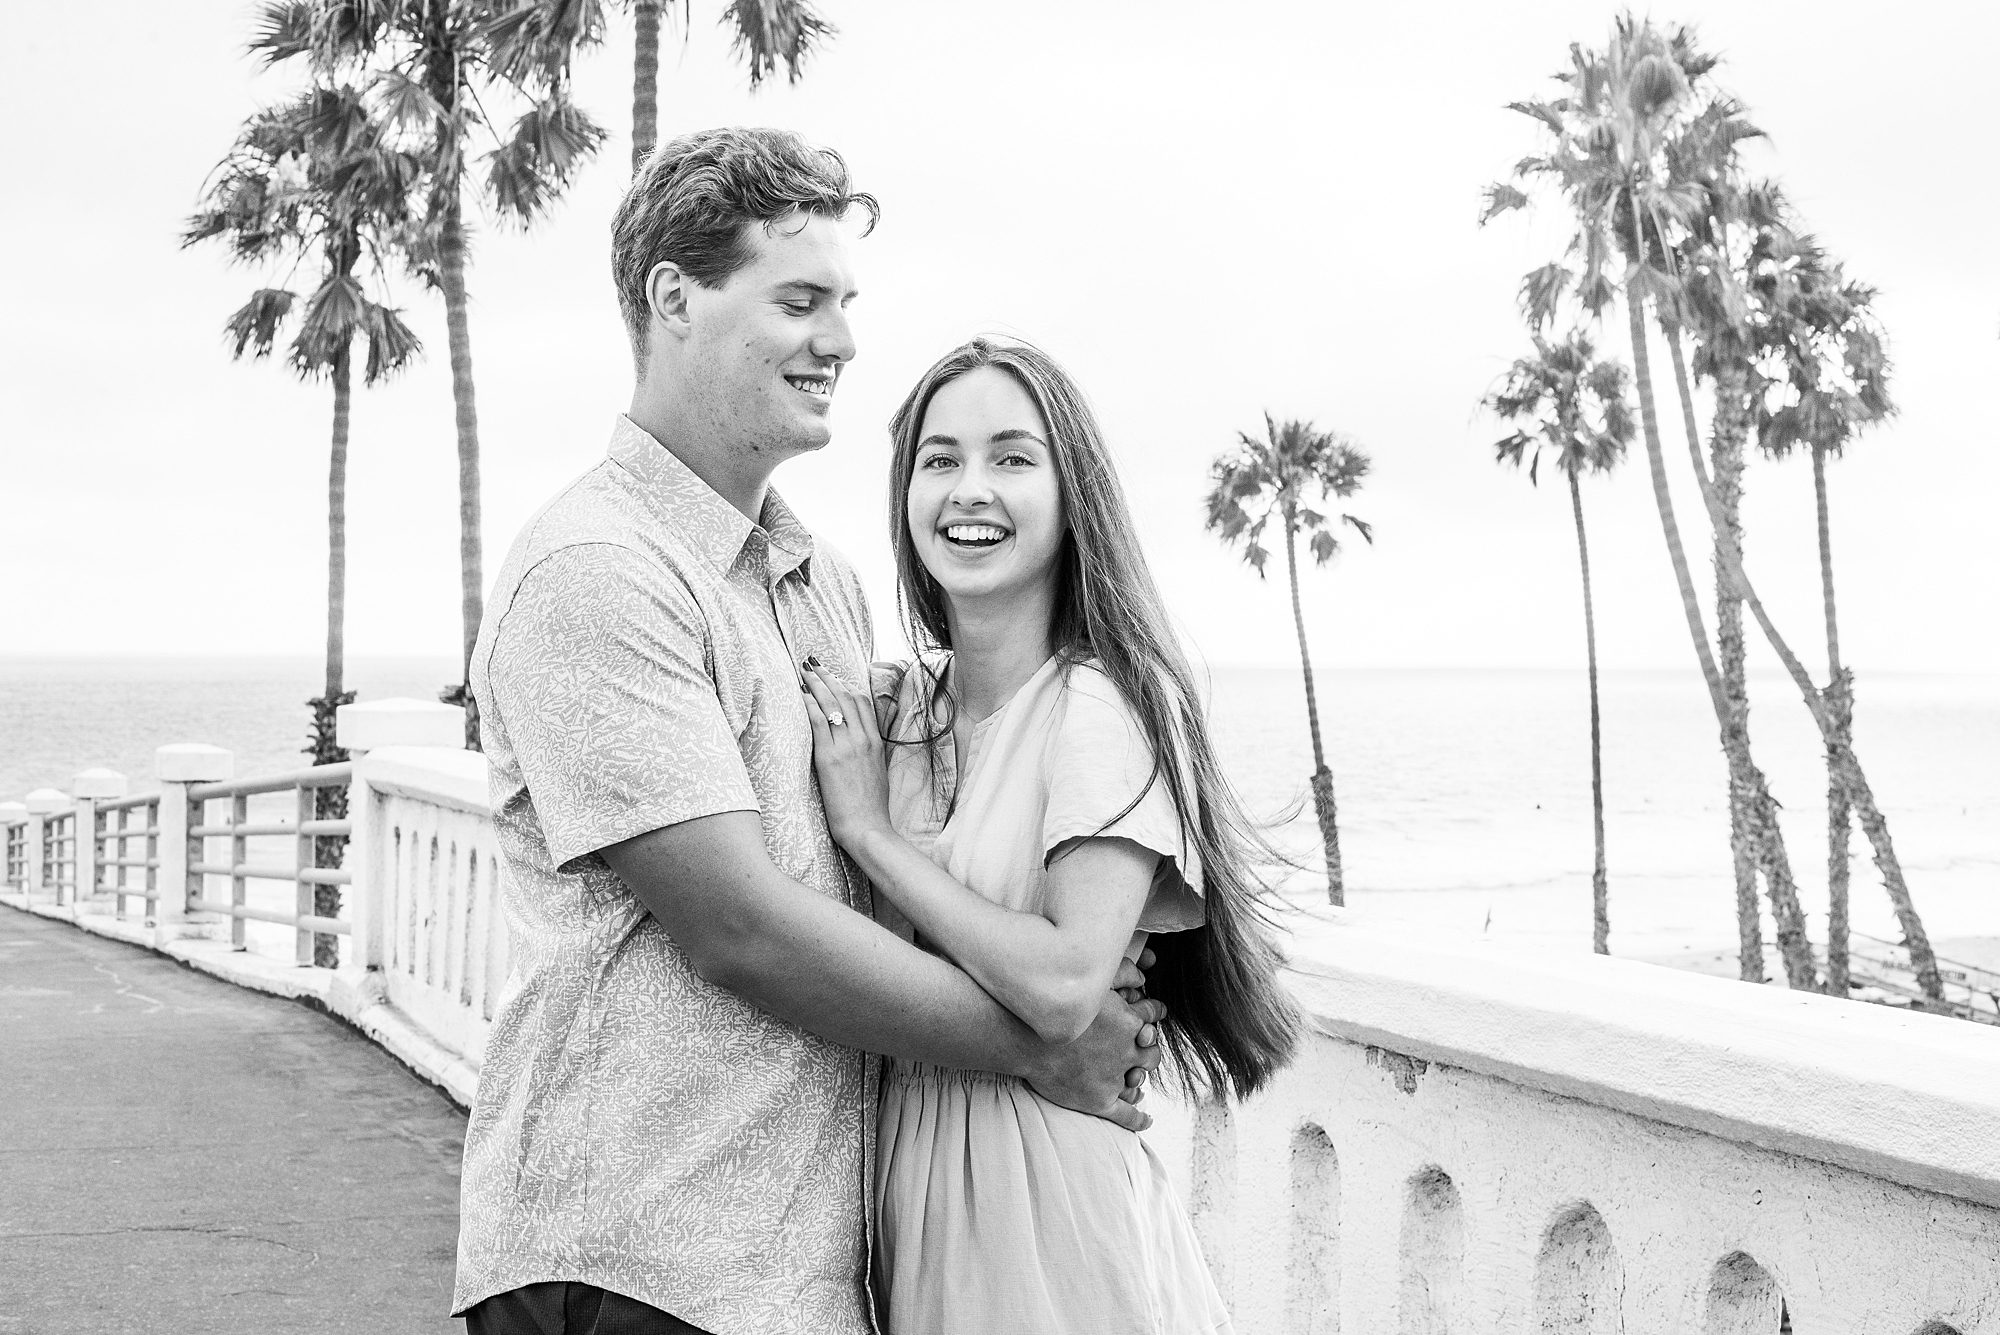 San Diego family photographer captures couple at Oceanside, CA